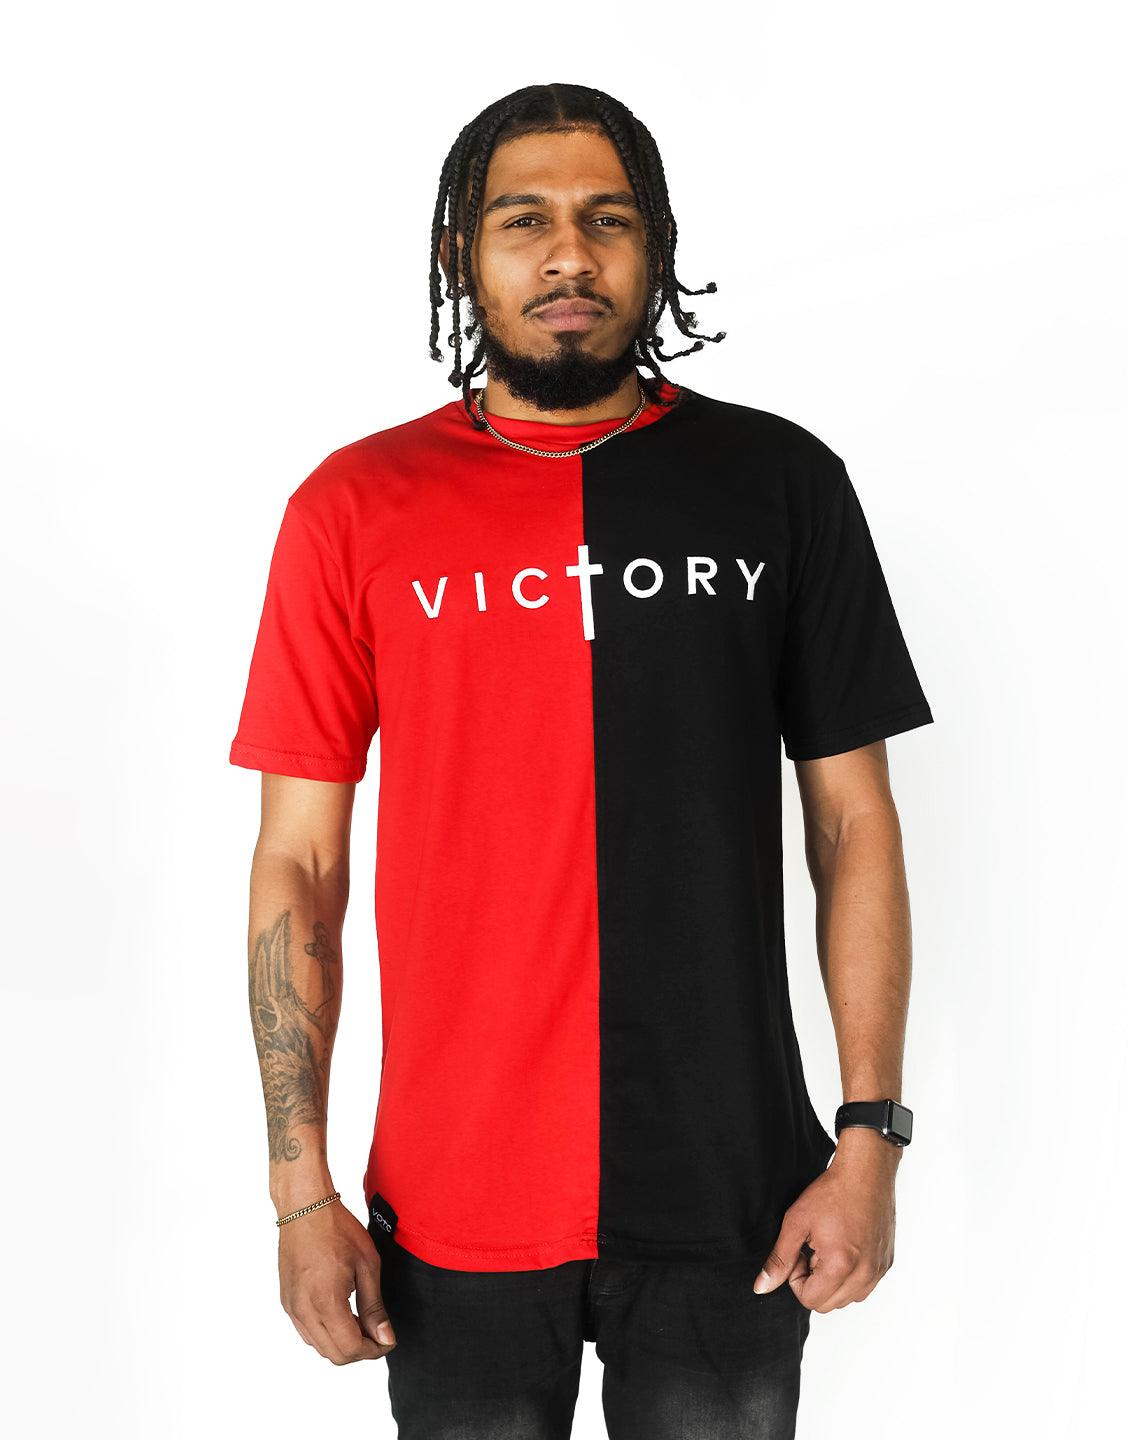 Embroidered - VOTC Clothing